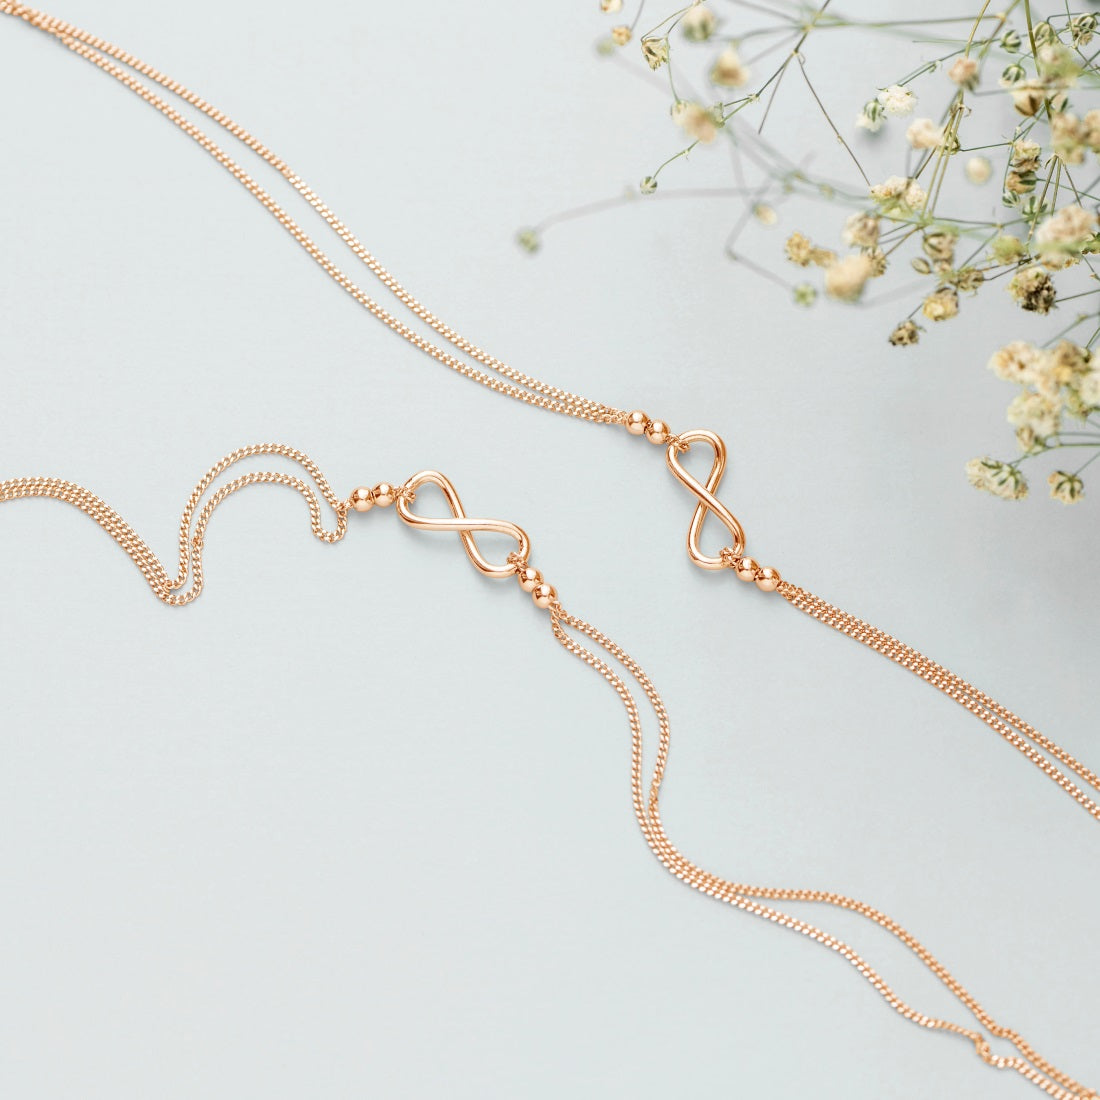 Rose Gold Eternity Duet 925 Sterling Silver Infinity Chain Anklet